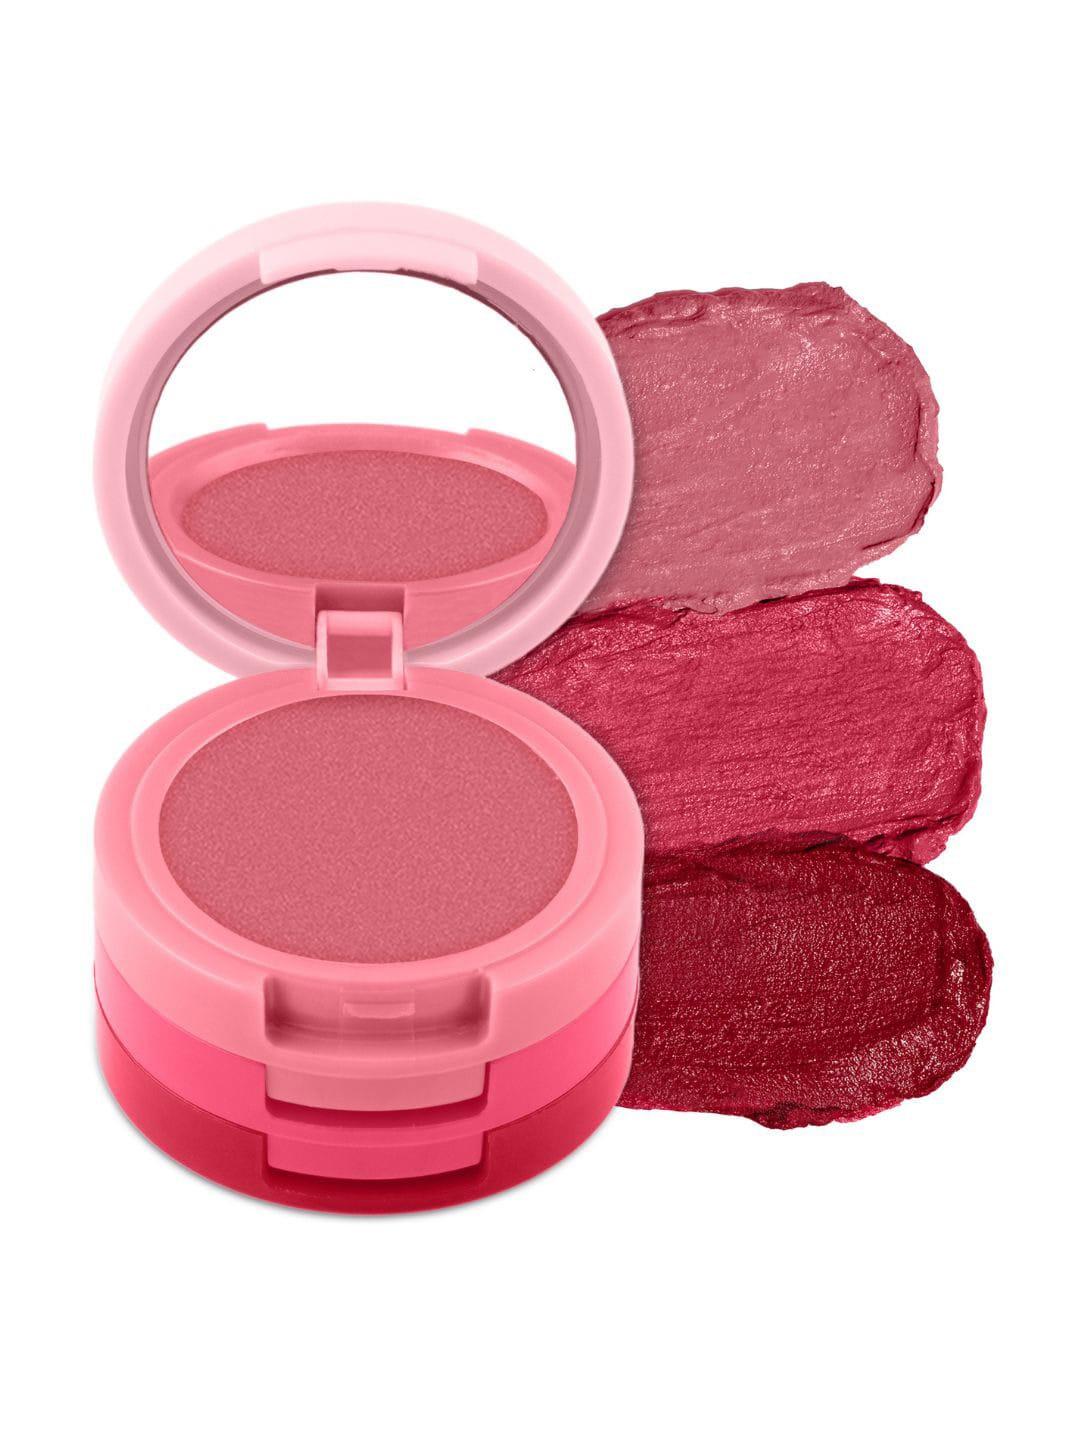 renee-glam-stack-3-in-1-long-lasting-lip-&-cheek-tint-with-shea-&-cocoa-butter---pink